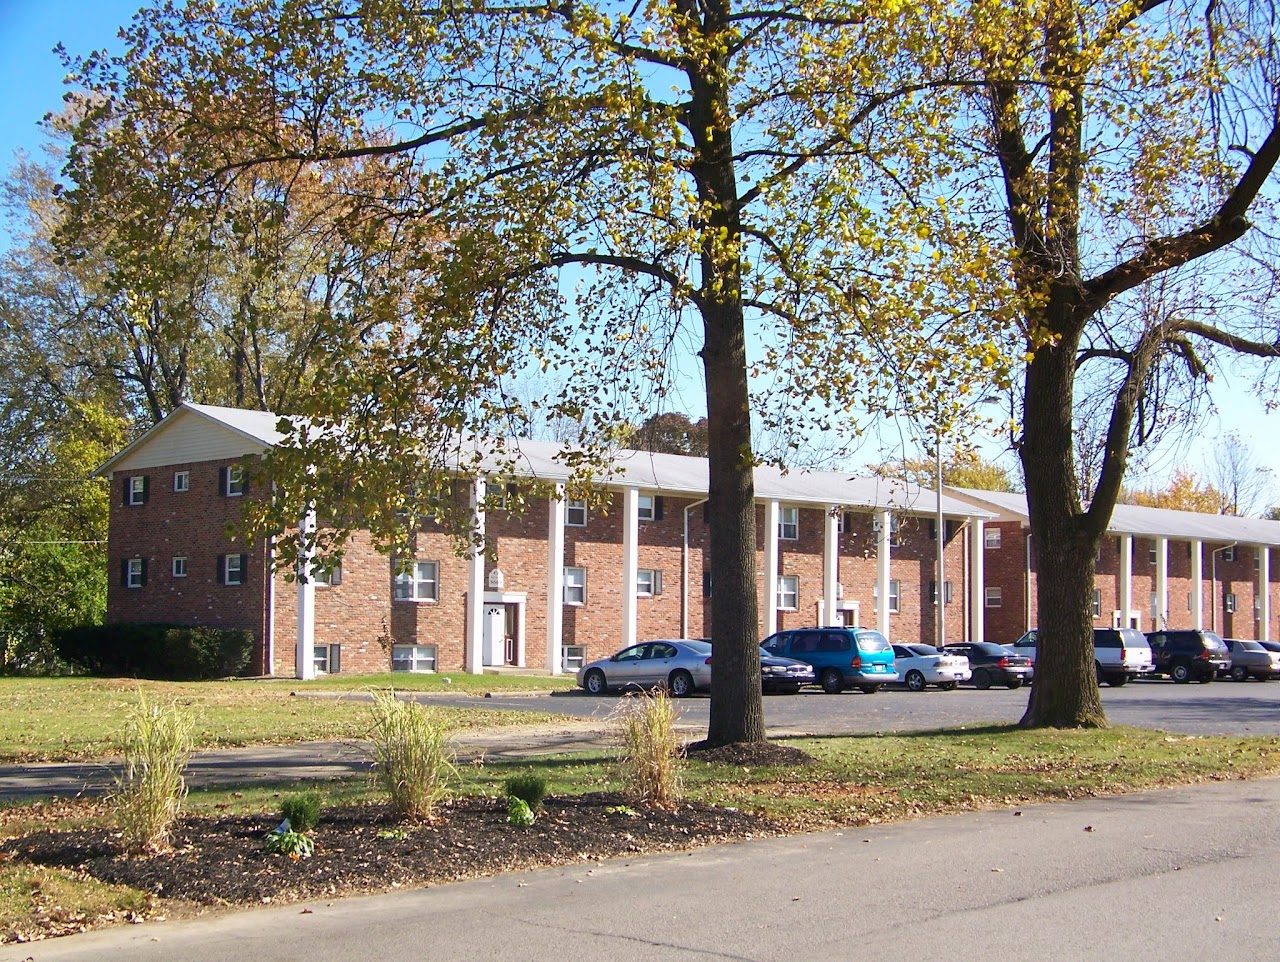 Photo of LAWRENCE GLEN. Affordable housing located at 8633 E 46TH ST INDIANAPOLIS, IN 46226